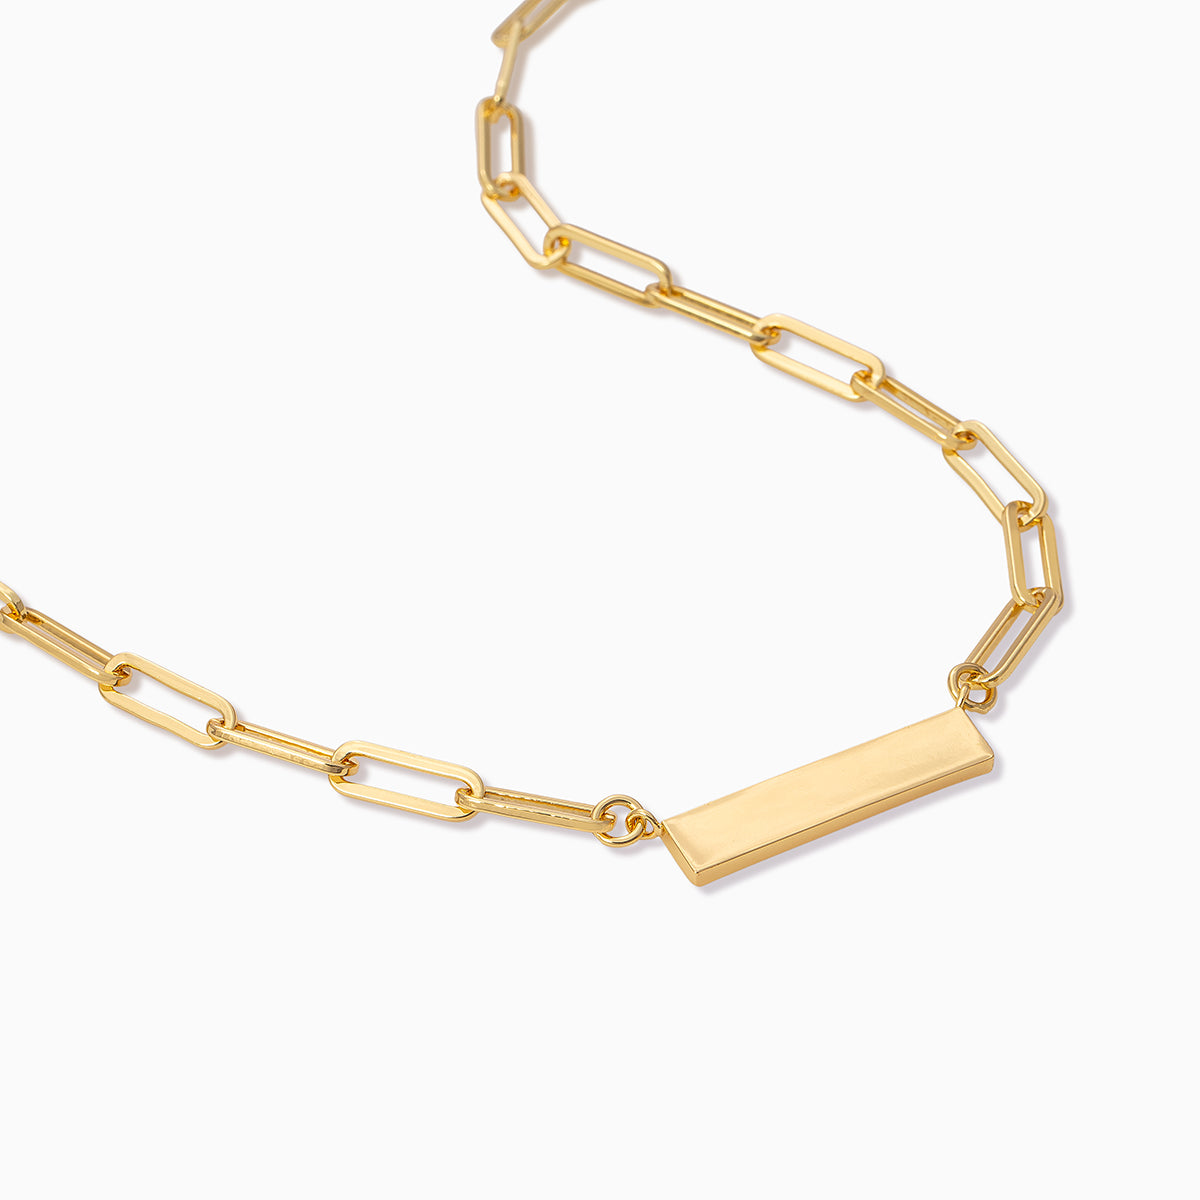 Chain and Bar Necklace | Gold | Product Detail Image | Uncommon James